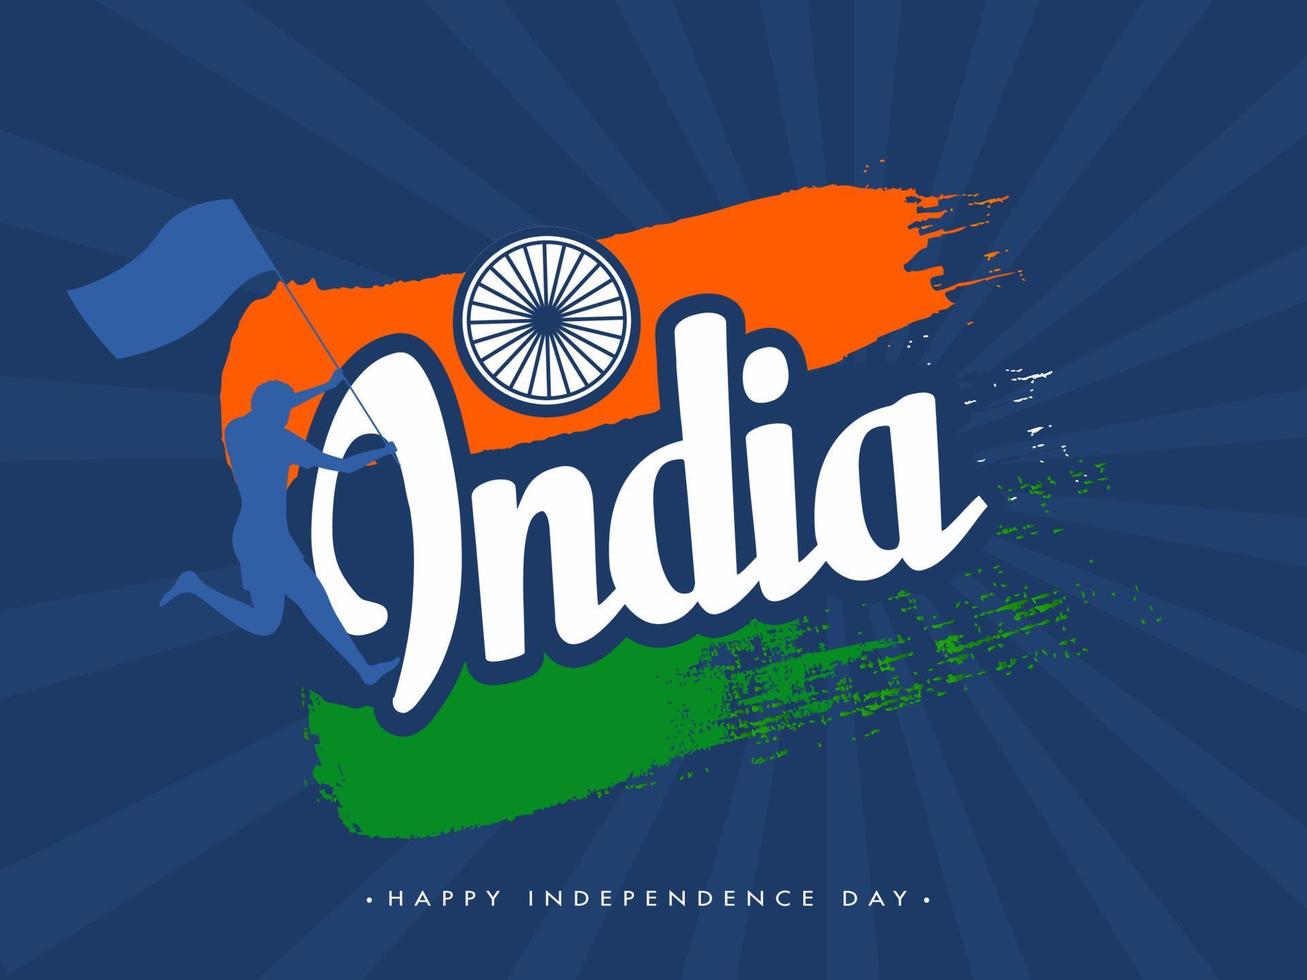 India Text with Ashoka Wheel, Silhouette Runner Man Holding Flag, Saffron and Green Brush Effect on Blue Rays Background for Happy Independence Day. vector